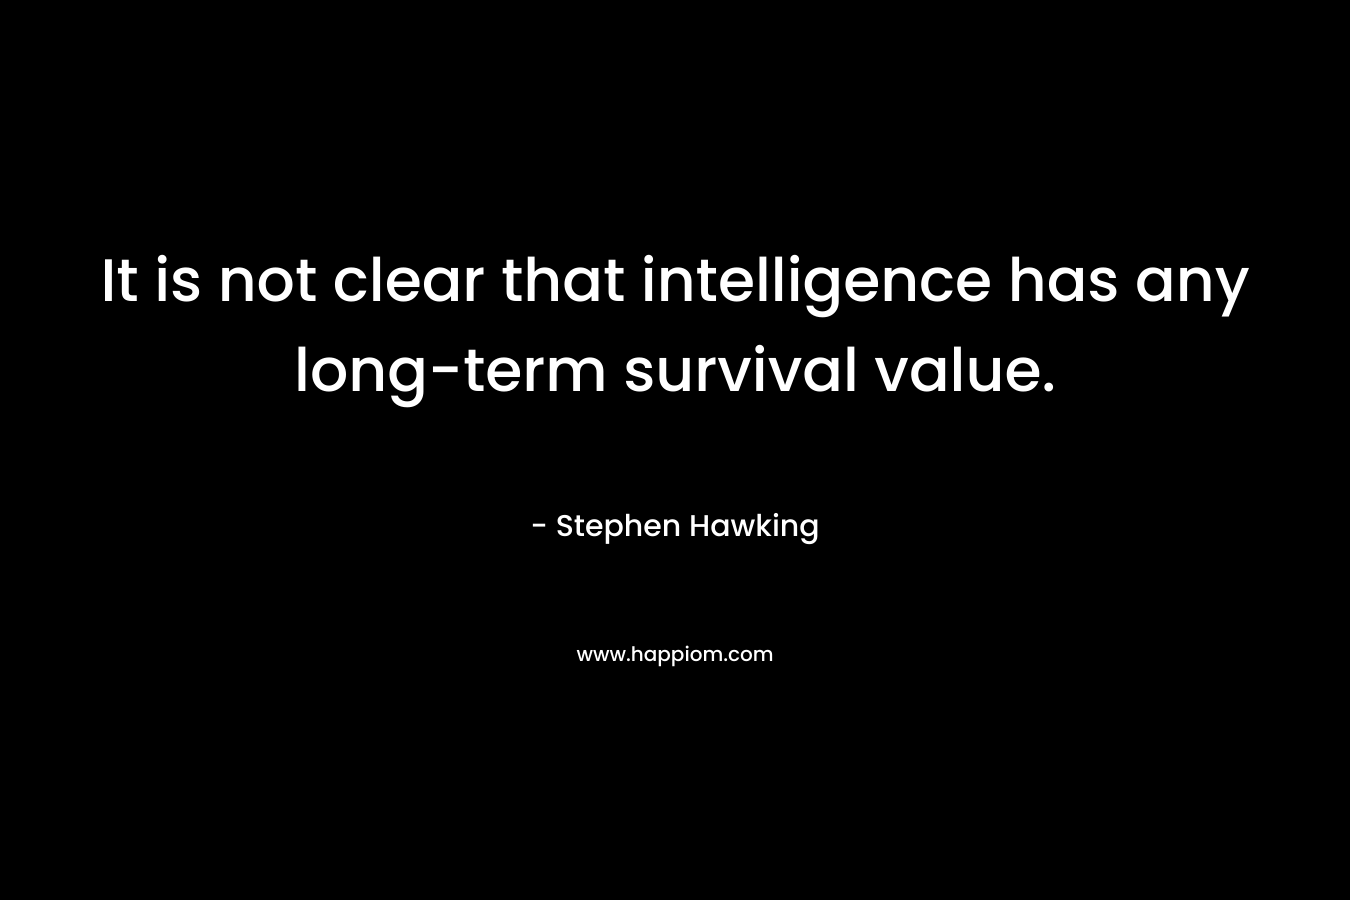 It is not clear that intelligence has any long-term survival value. – Stephen Hawking